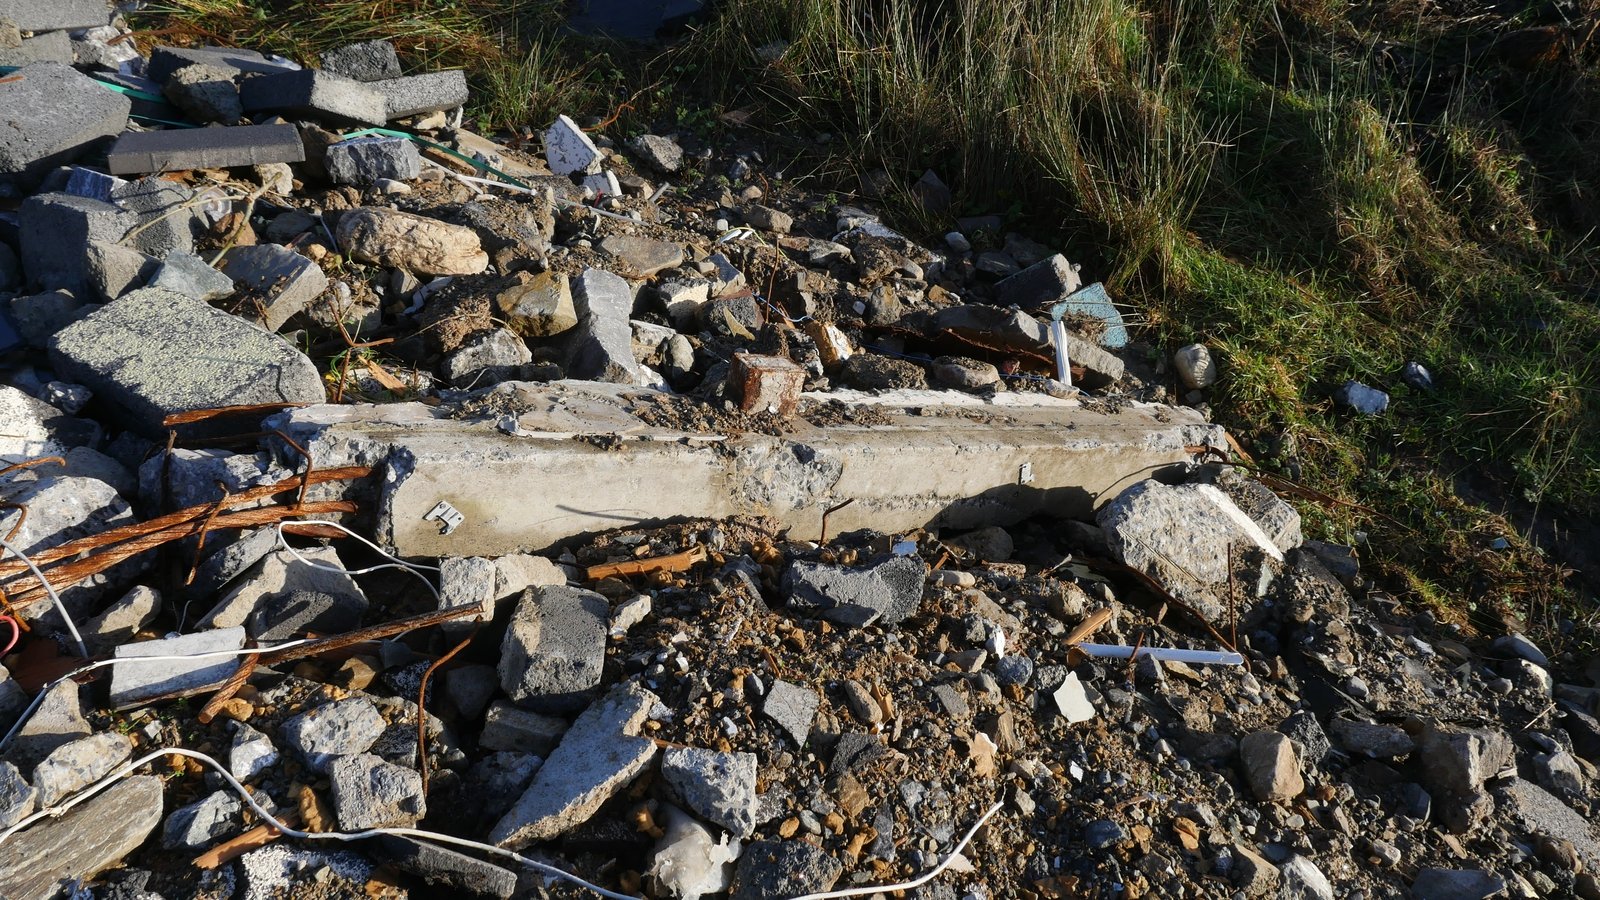 Image - Demolition waste from Clifden Community School left at an unpermitted site.